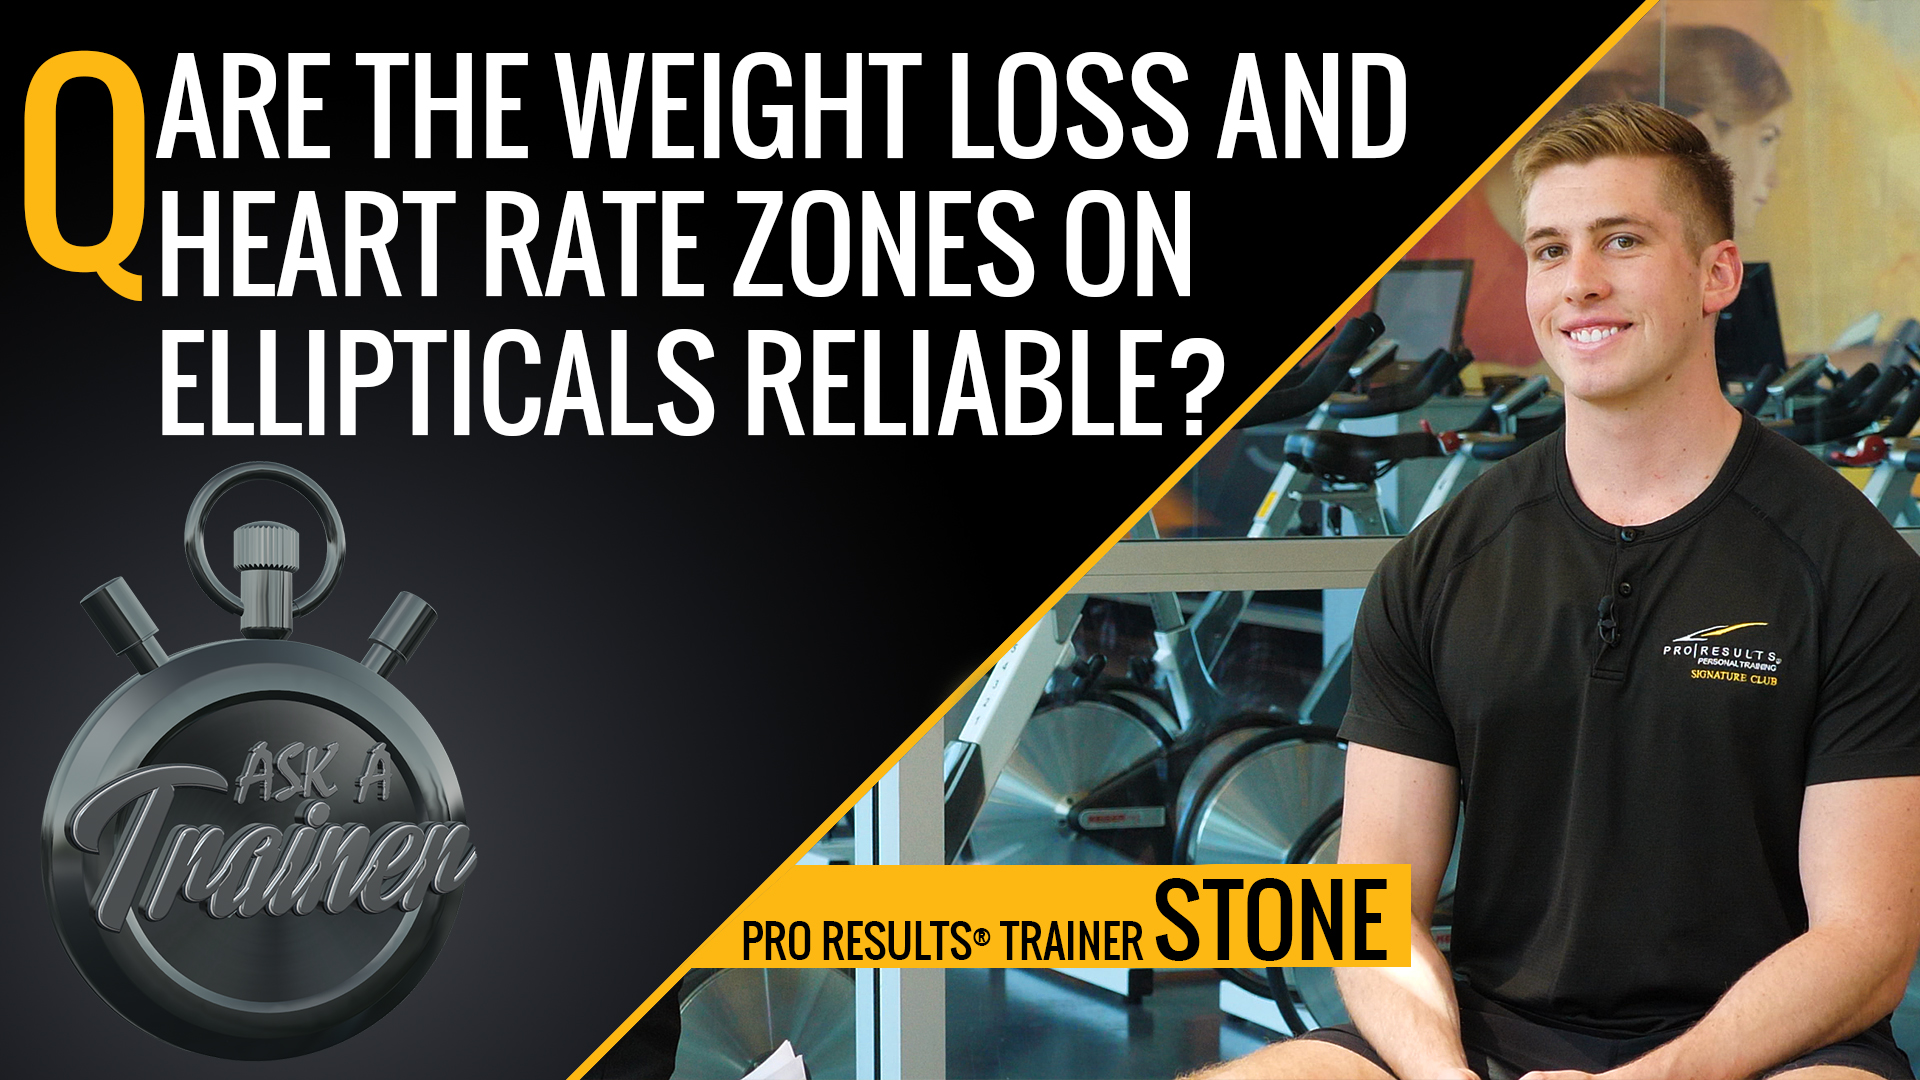 AAT: Ep. 27 – Are the Weight Loss and Heart Rate Zones on Ellipticals Reliable?